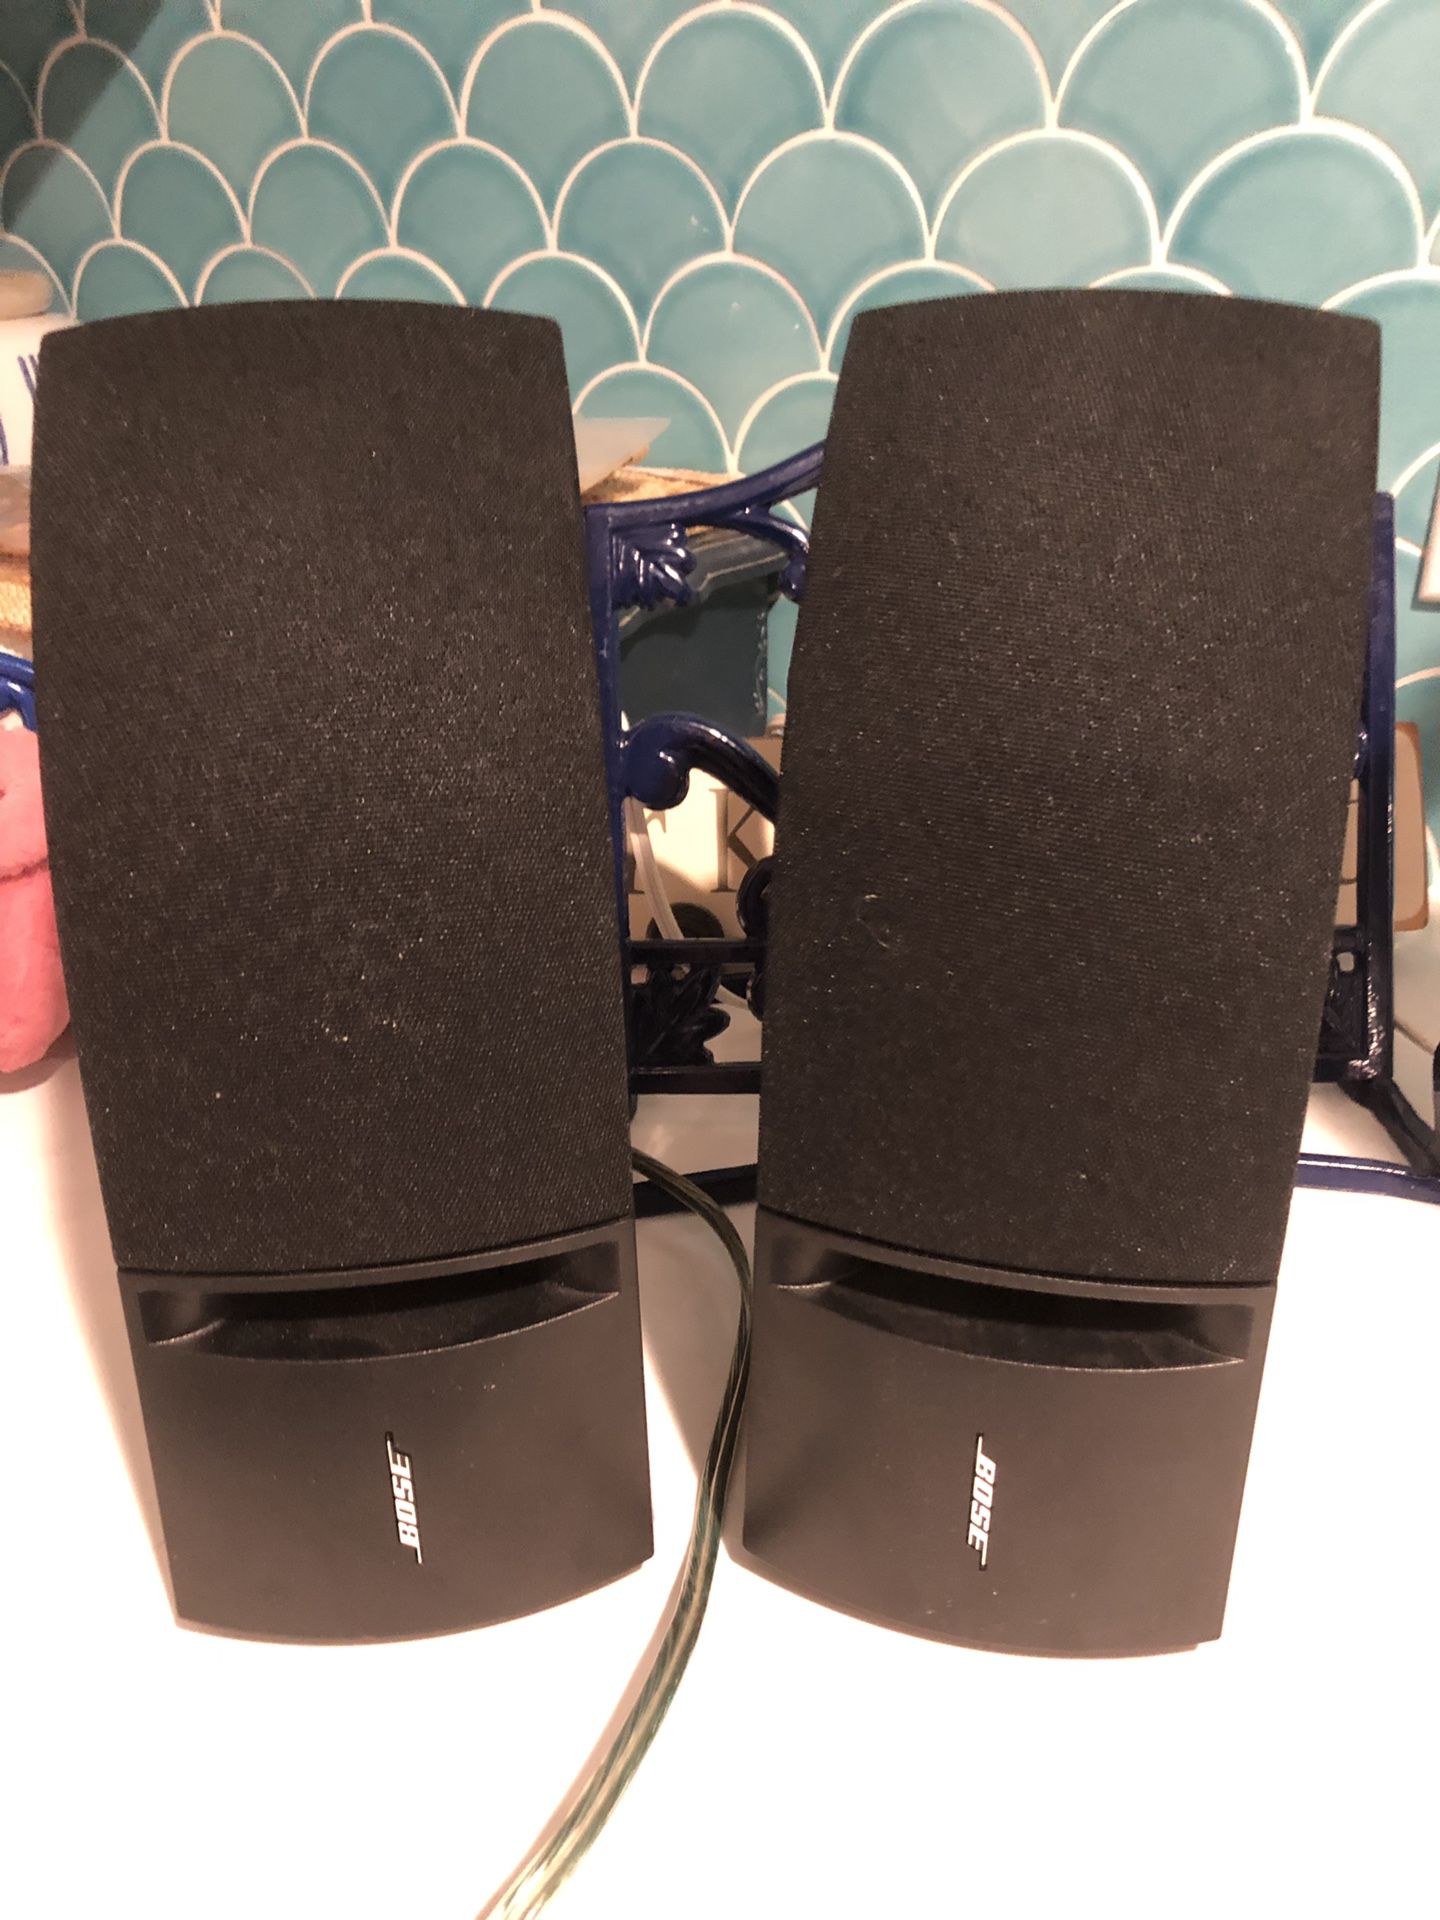 Bose model 161 wall mounted speakers.I have the wall mounts for them.